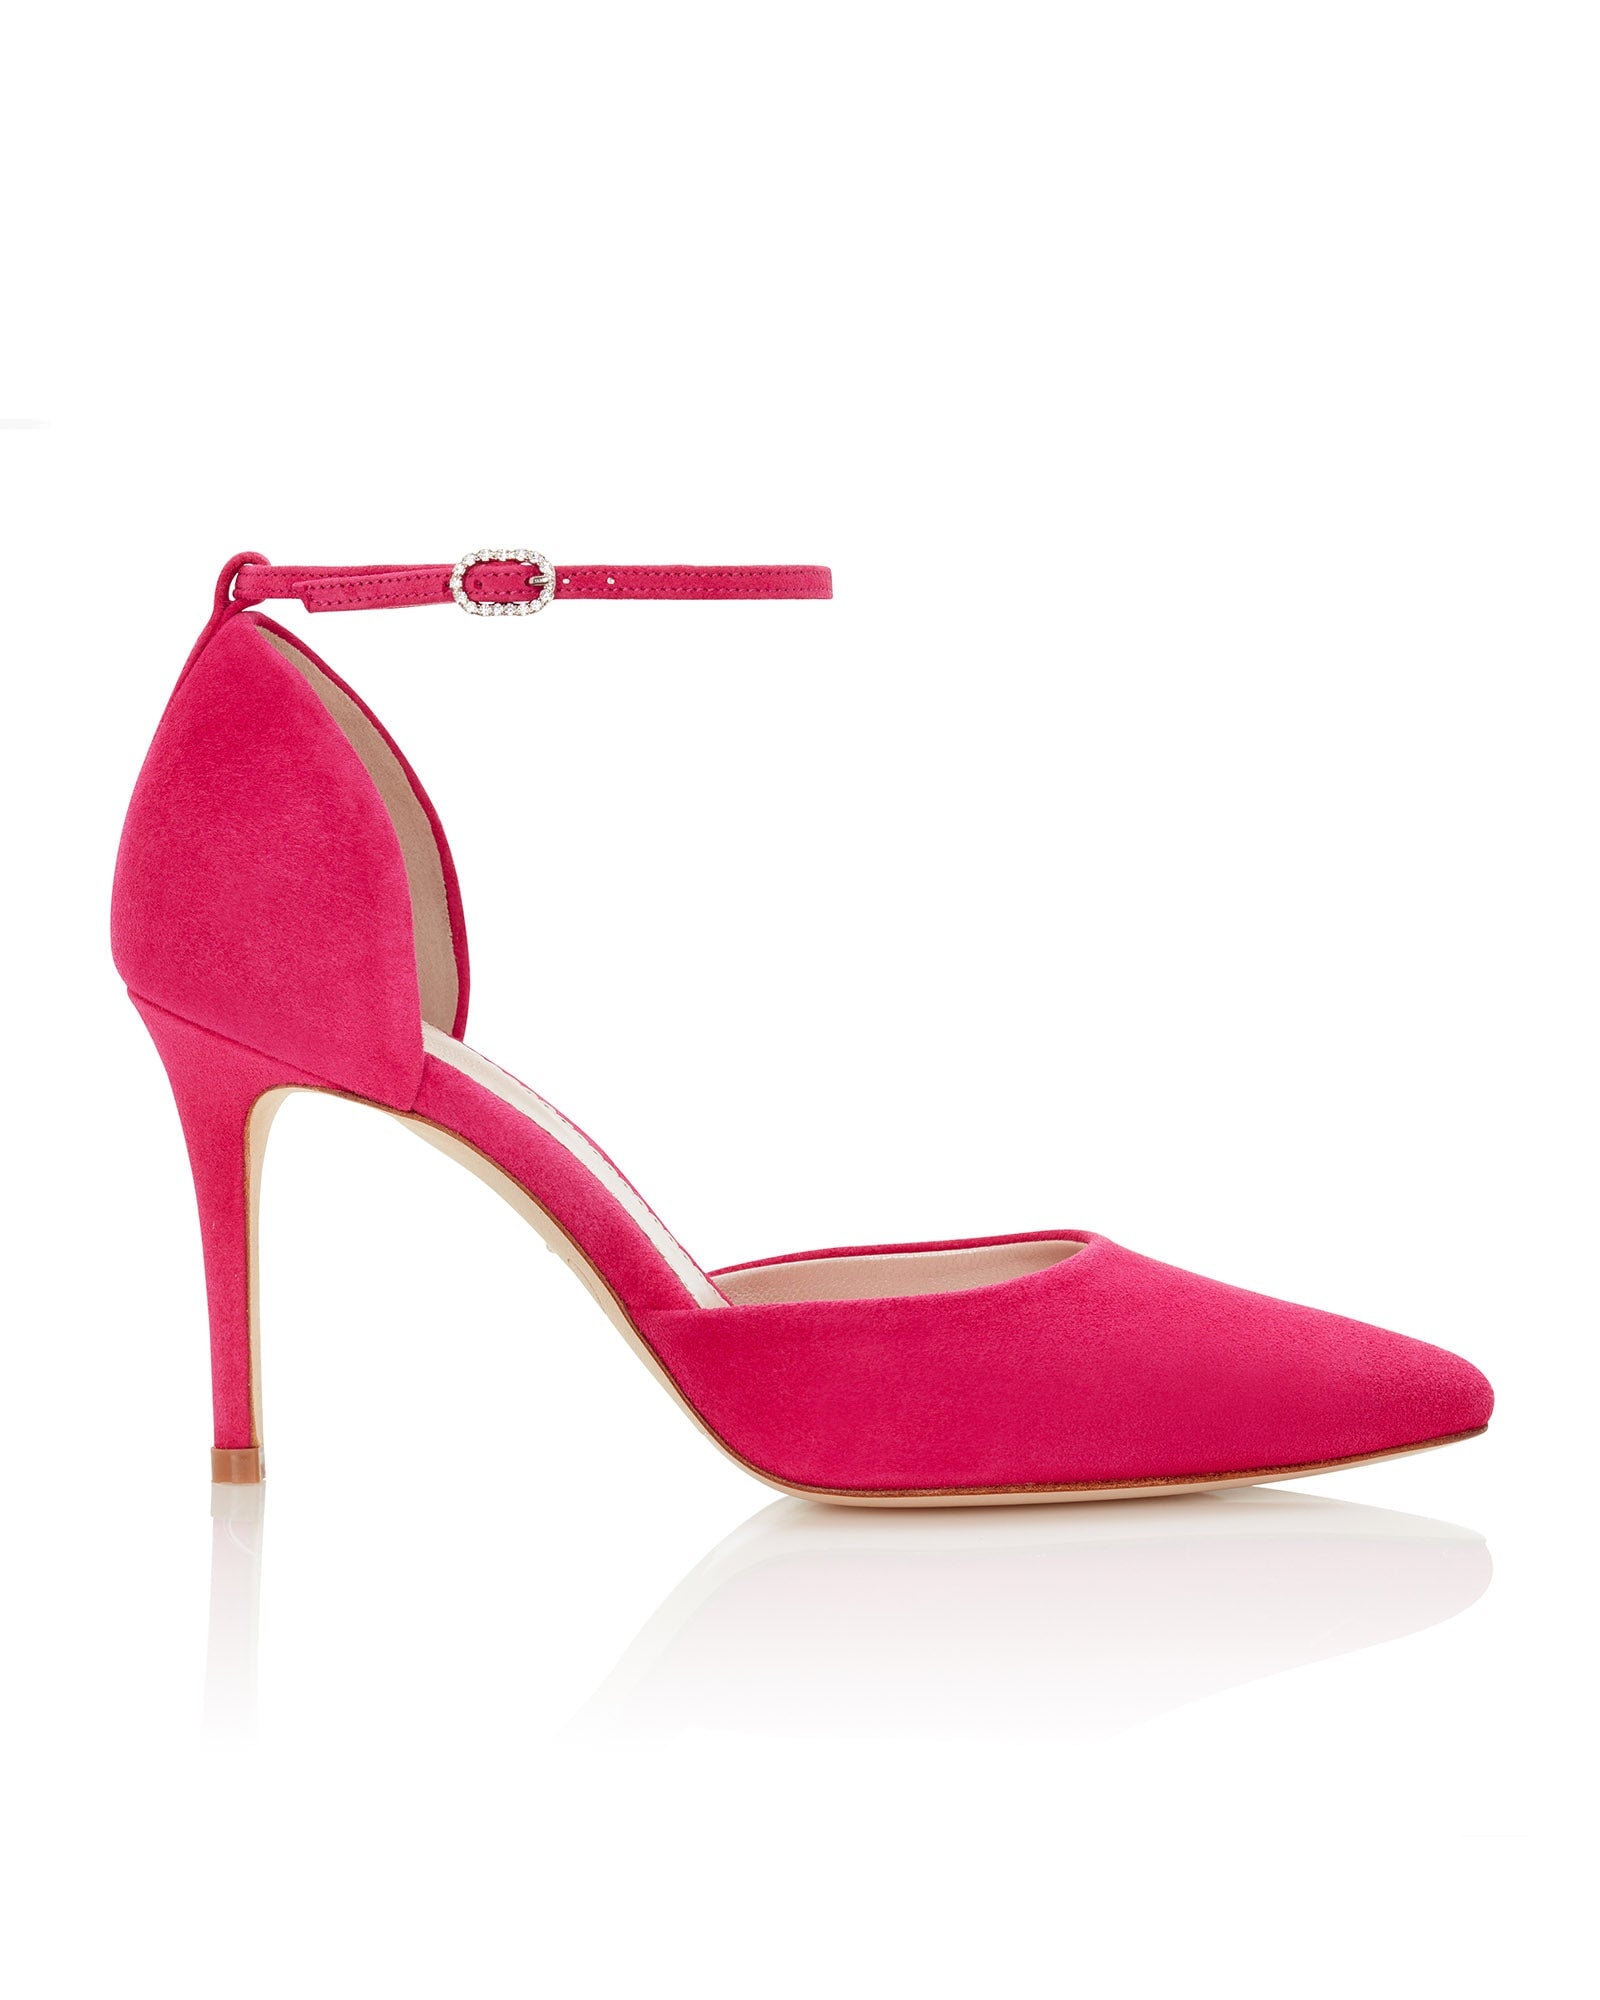 Harriet Hot Pink Fashion Shoe Pink Heels with Ankle Tie Sash  image